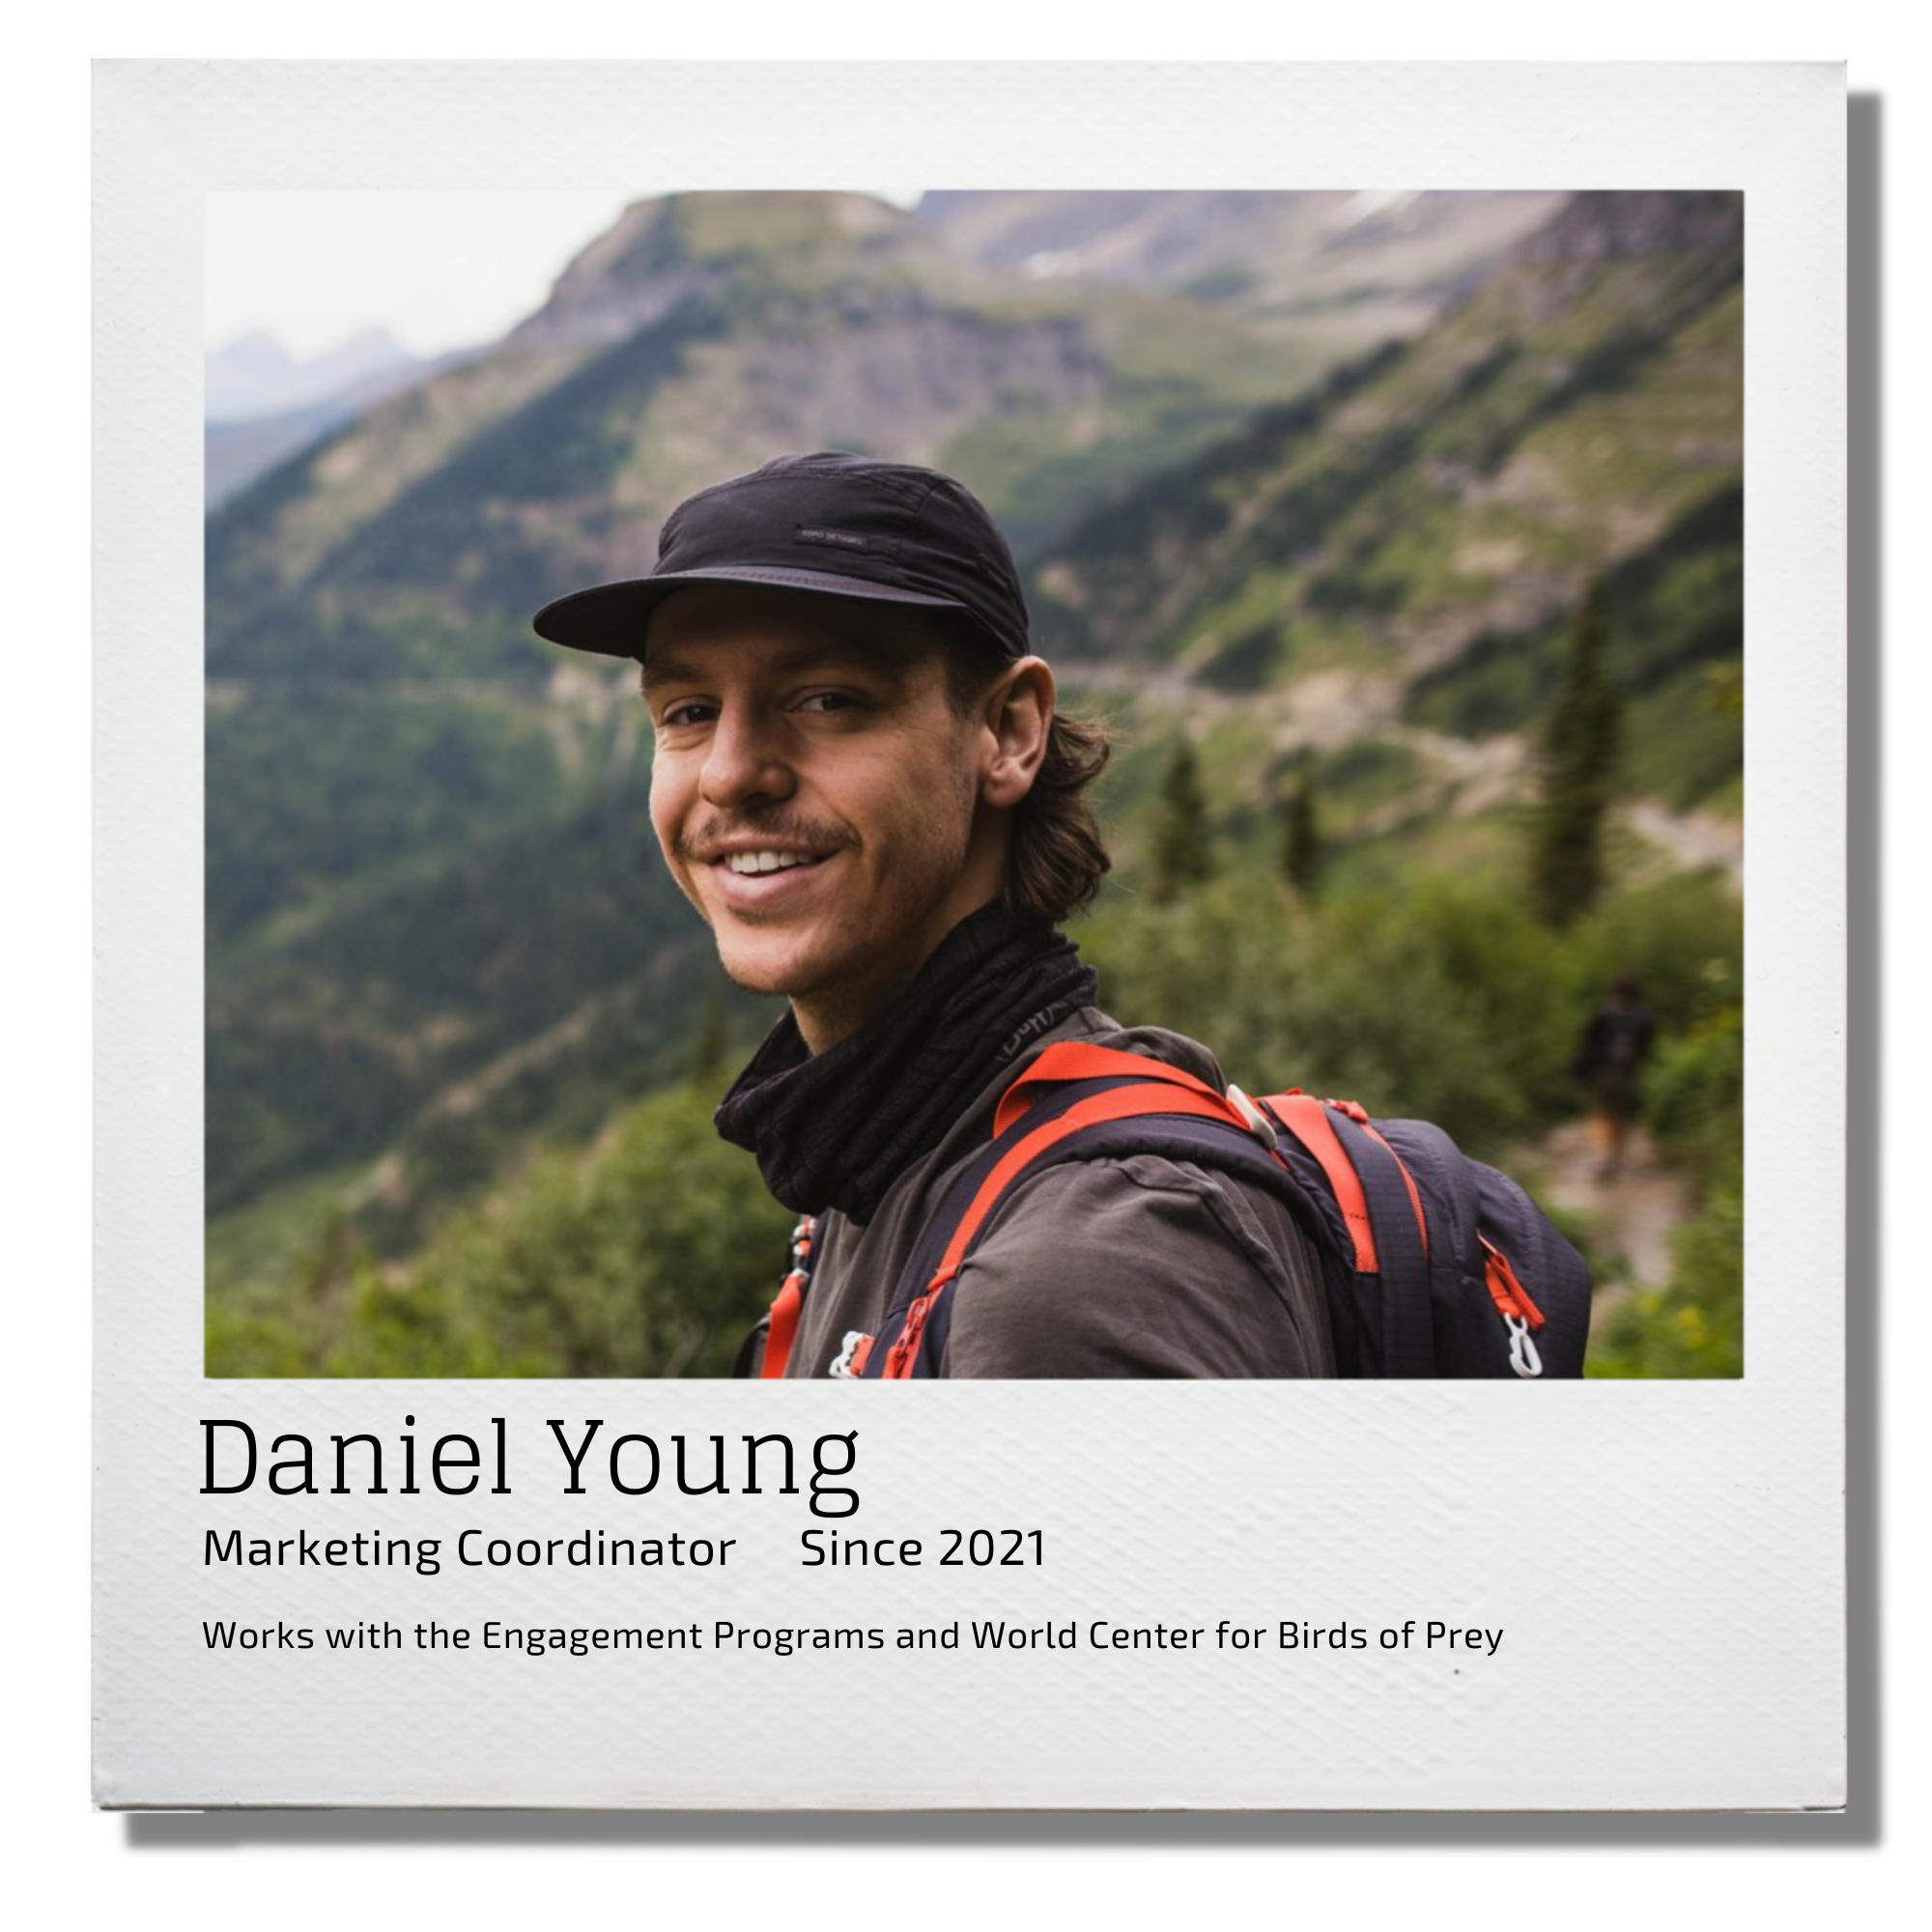 Daniel Young Marketing Coordinator since 2021 Works with Engagement Programs and World Center for Birds of Prey